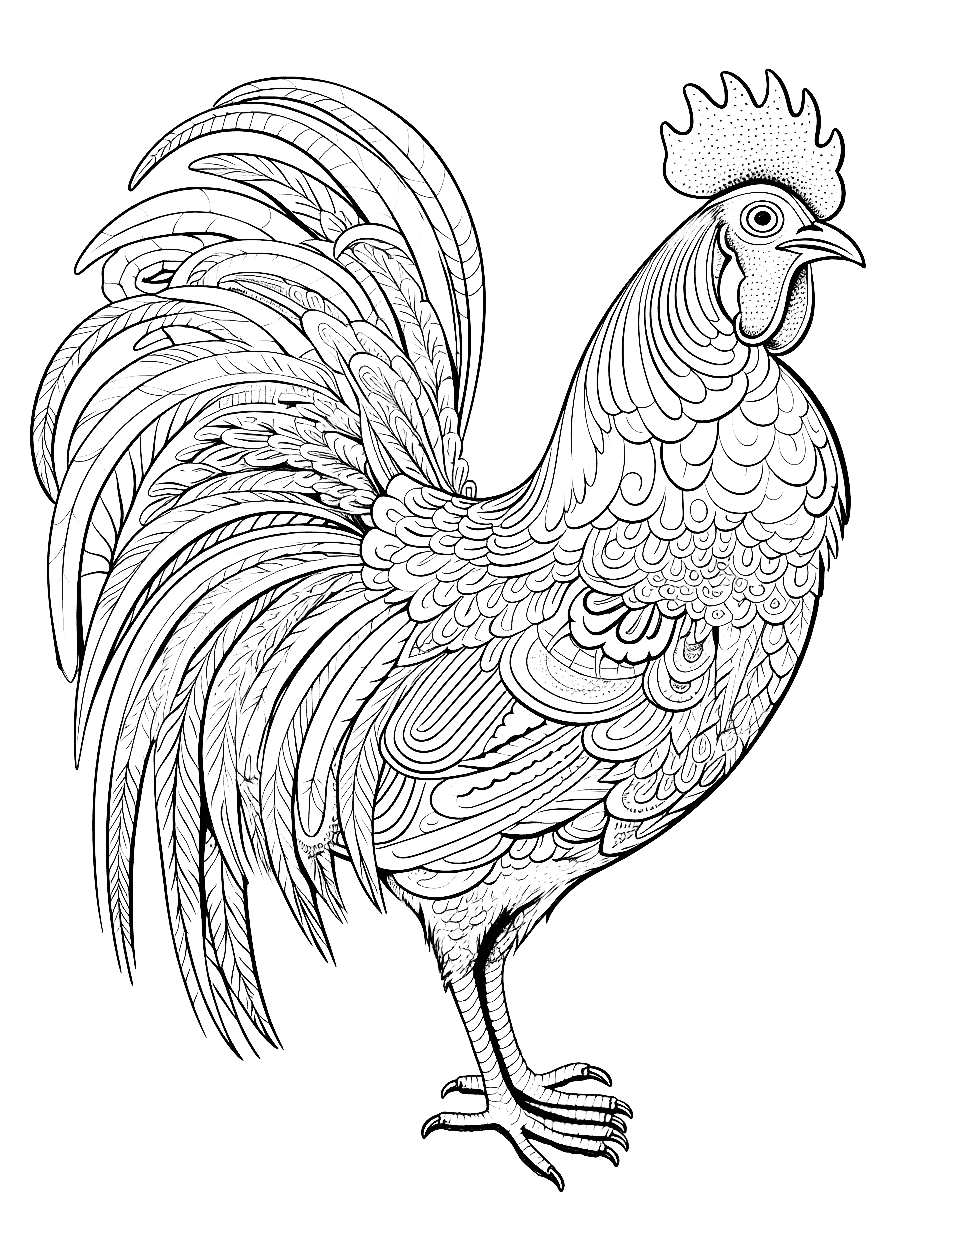 Rooster With Detail Adult Coloring Page - A detailed rooster standing proudly.